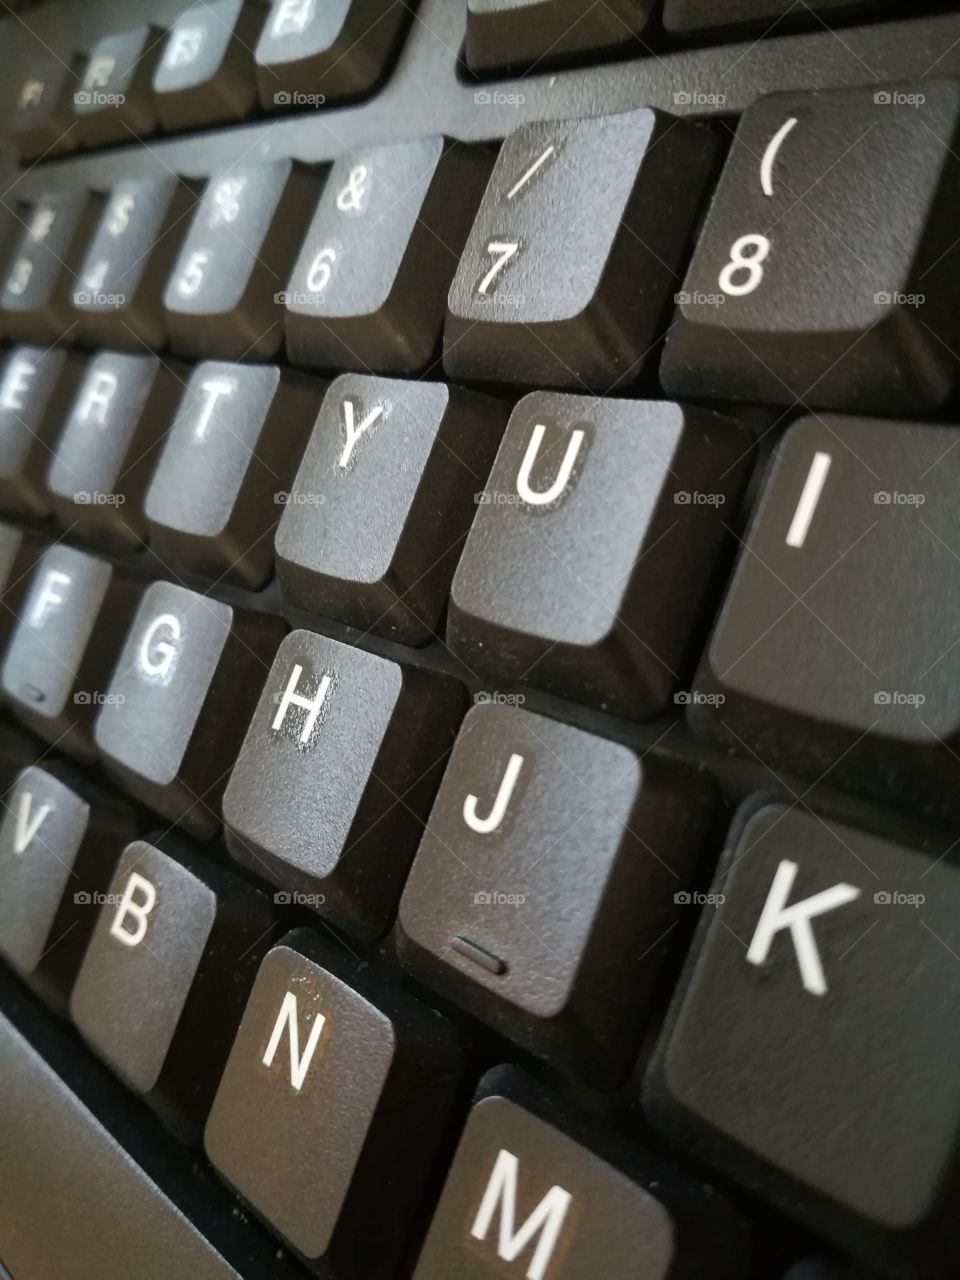 keyboard and other side